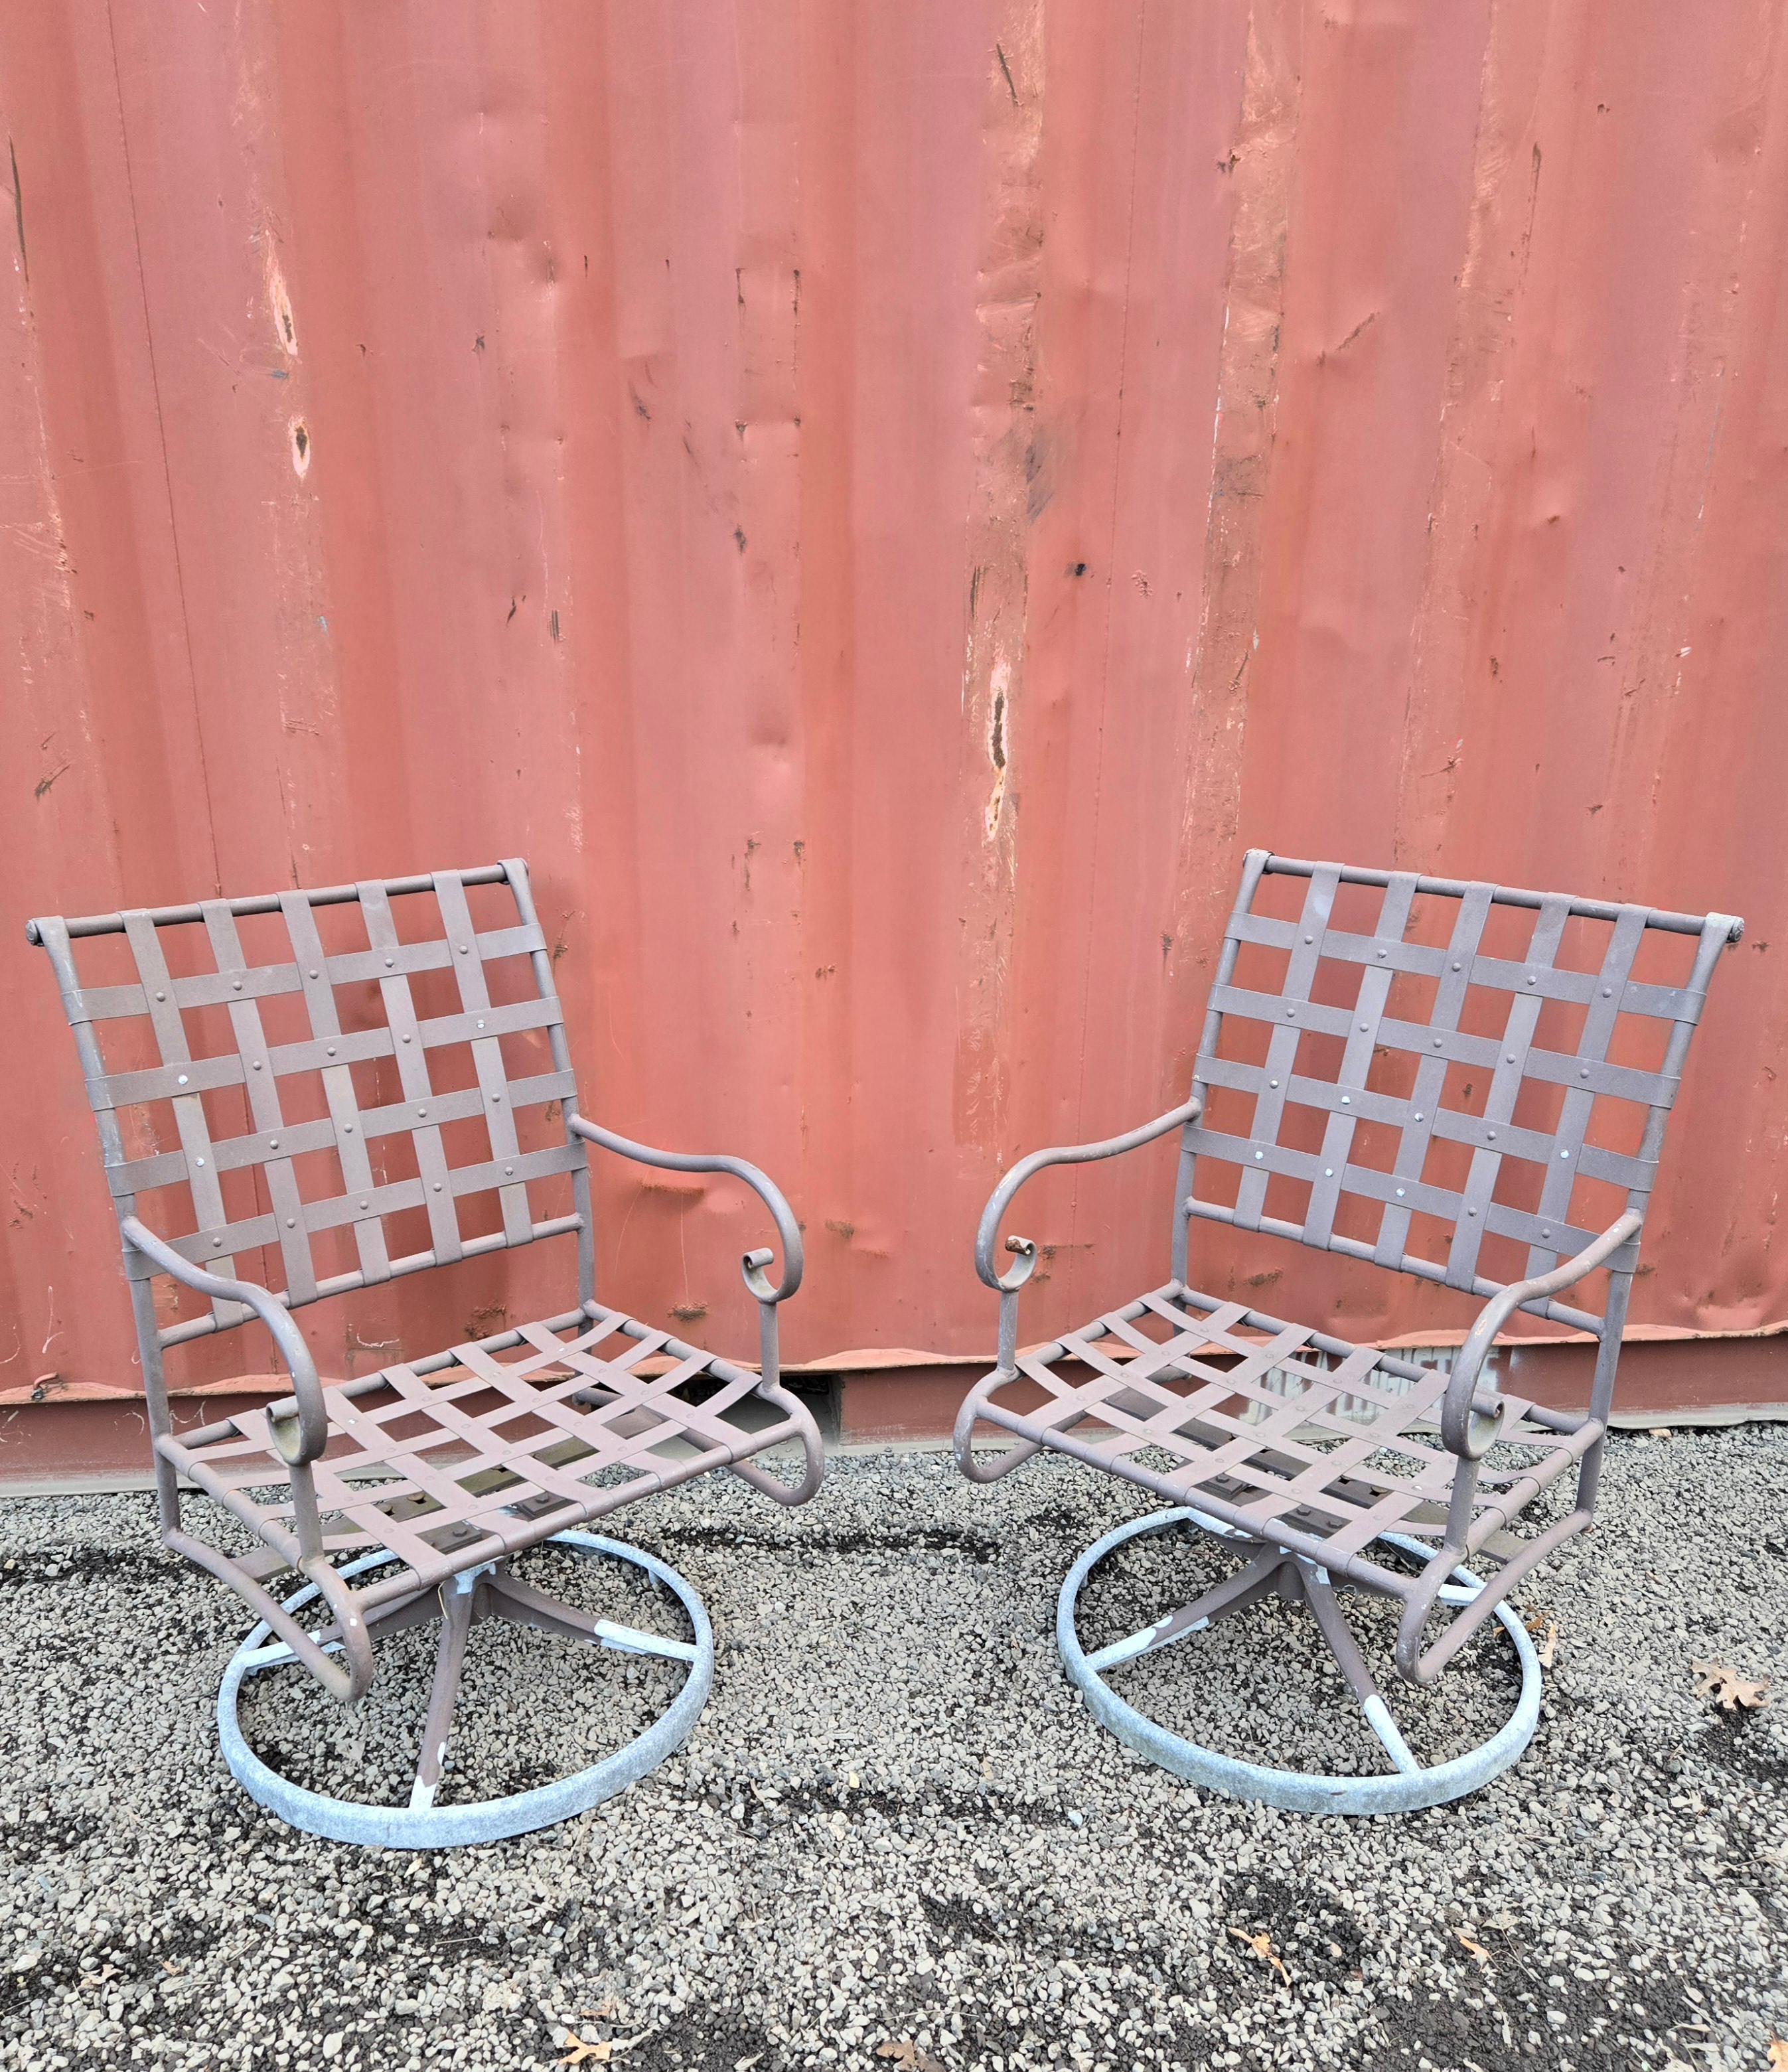 
This vintage wrought iron patio furniture set by Brown Jordan is perfect for your outdoor deck, garden, or patio. The swivel seats are comfortable and perfect to relax in poolside.


The mid-century modern style and brown color of chairs make this